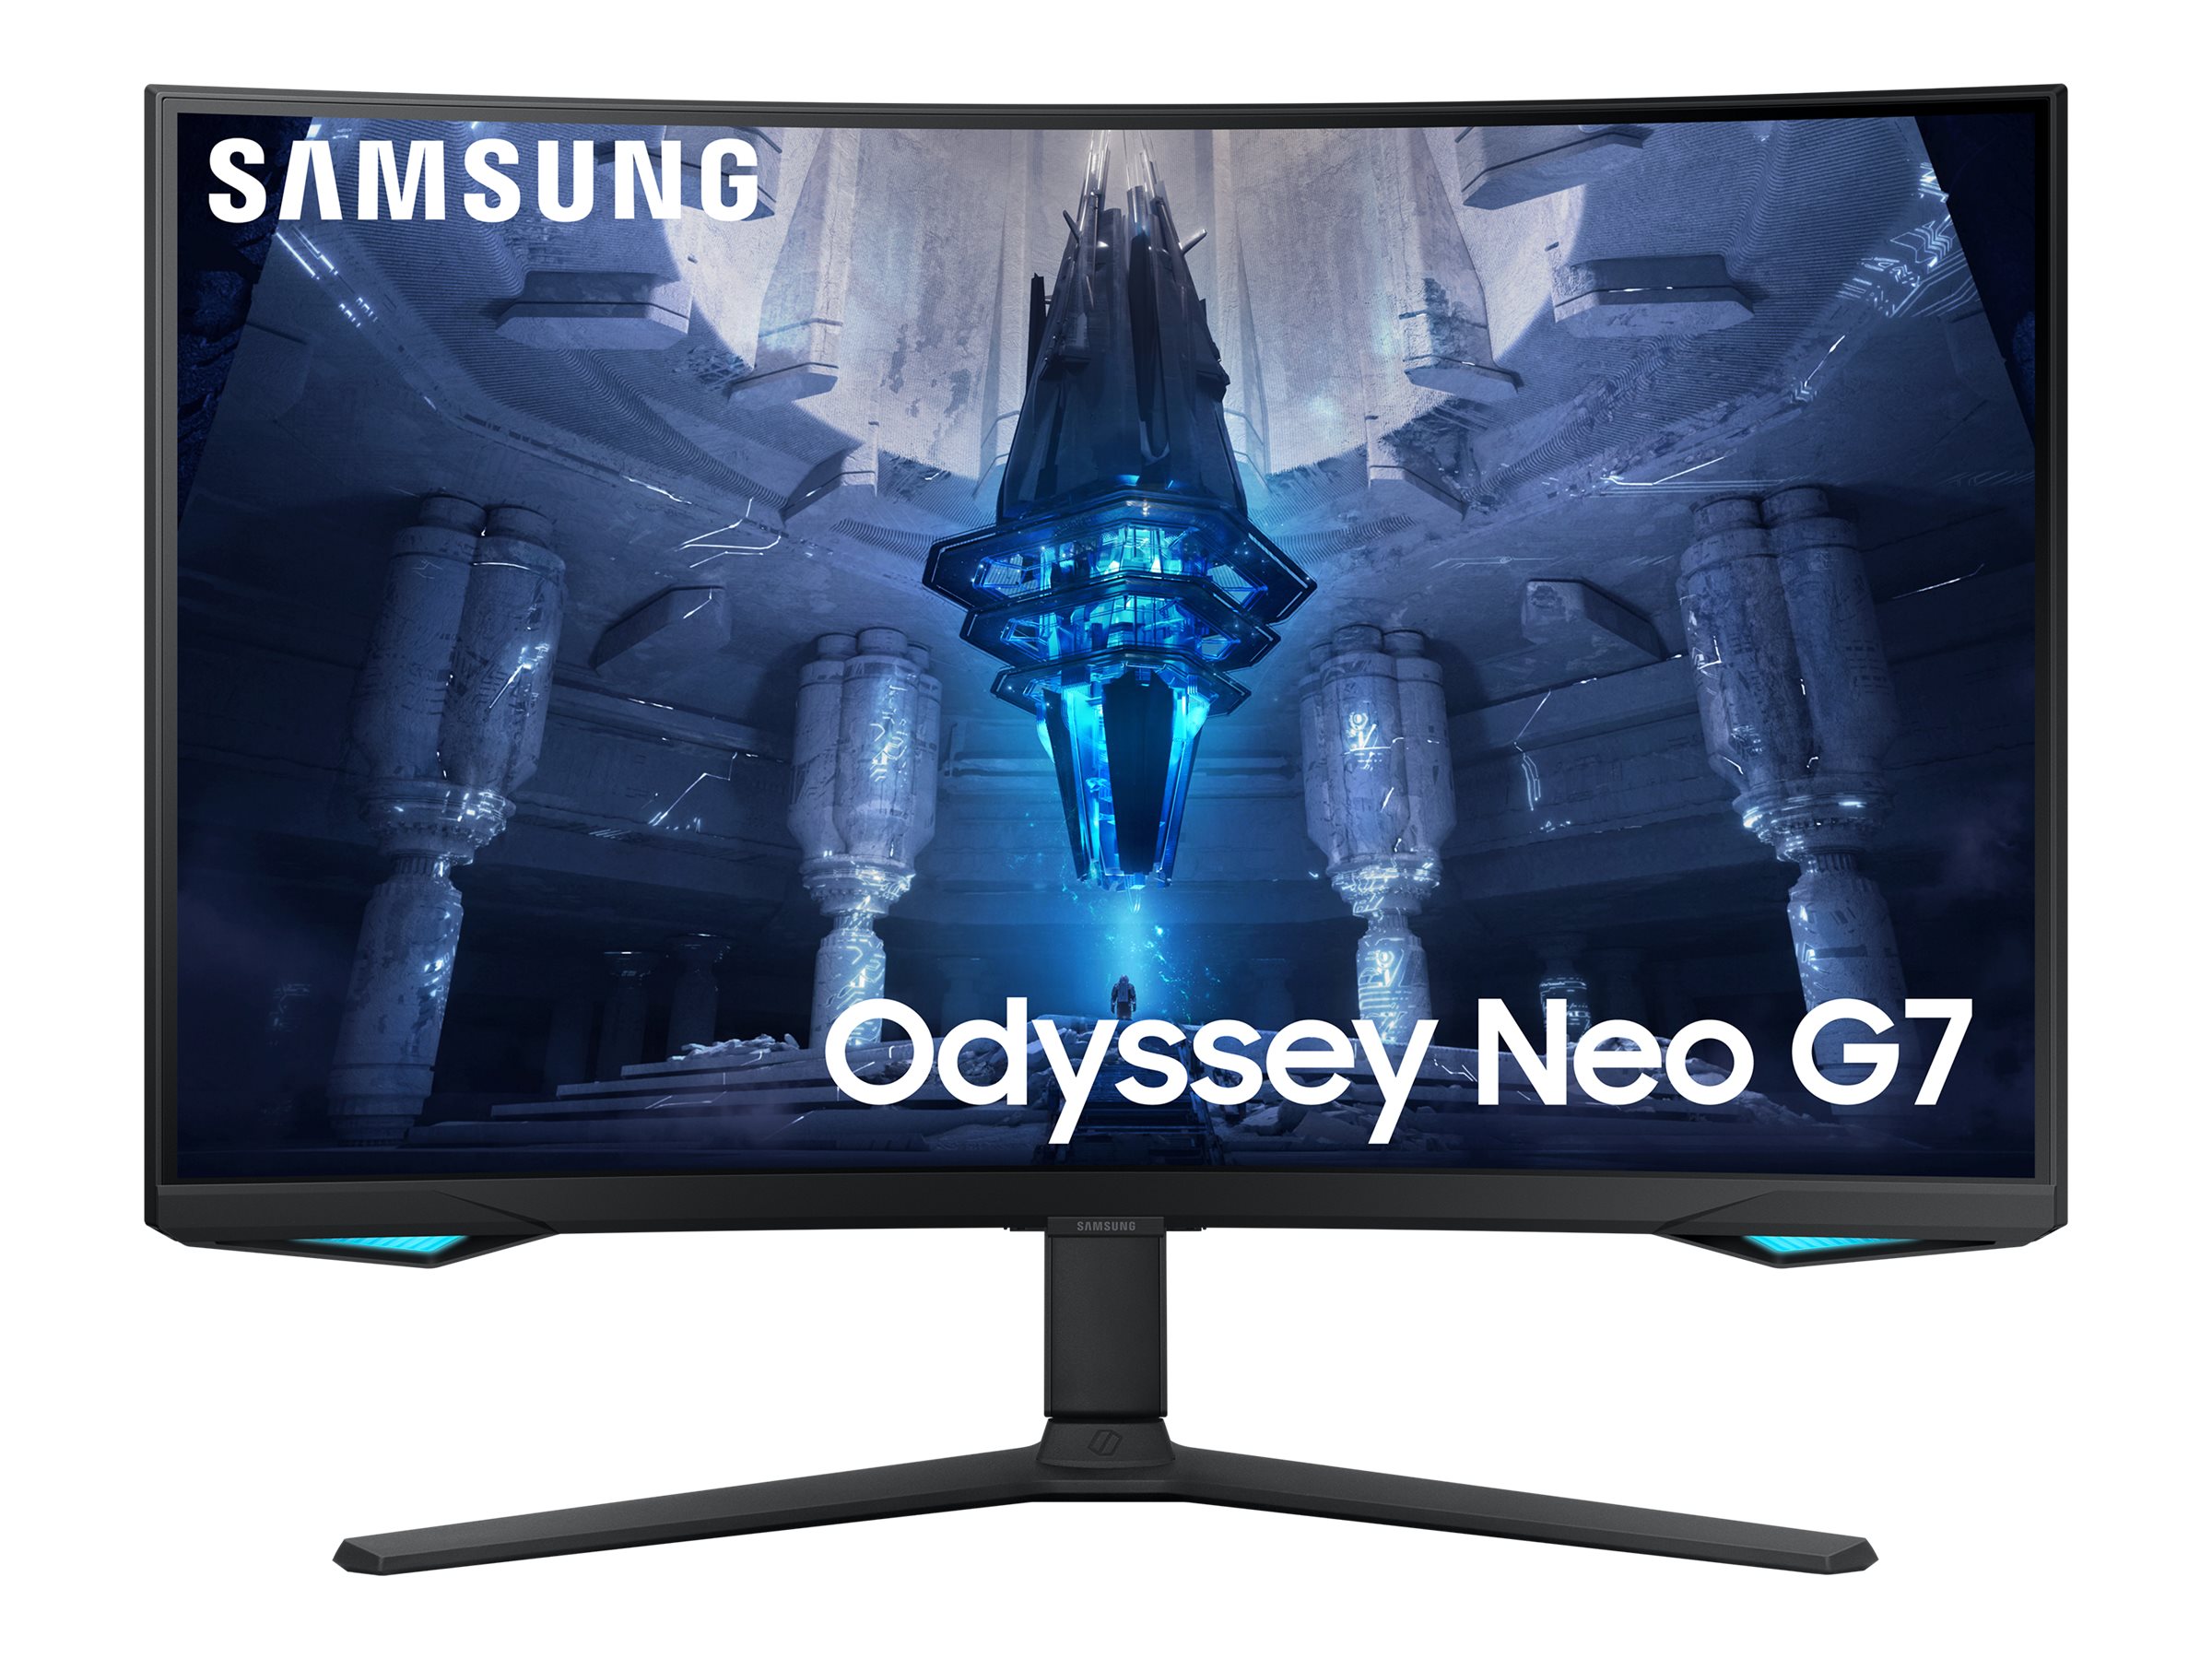 SAMSUNG Odyssey Neo G7 Curved Gaming Monitor 81cm (32")